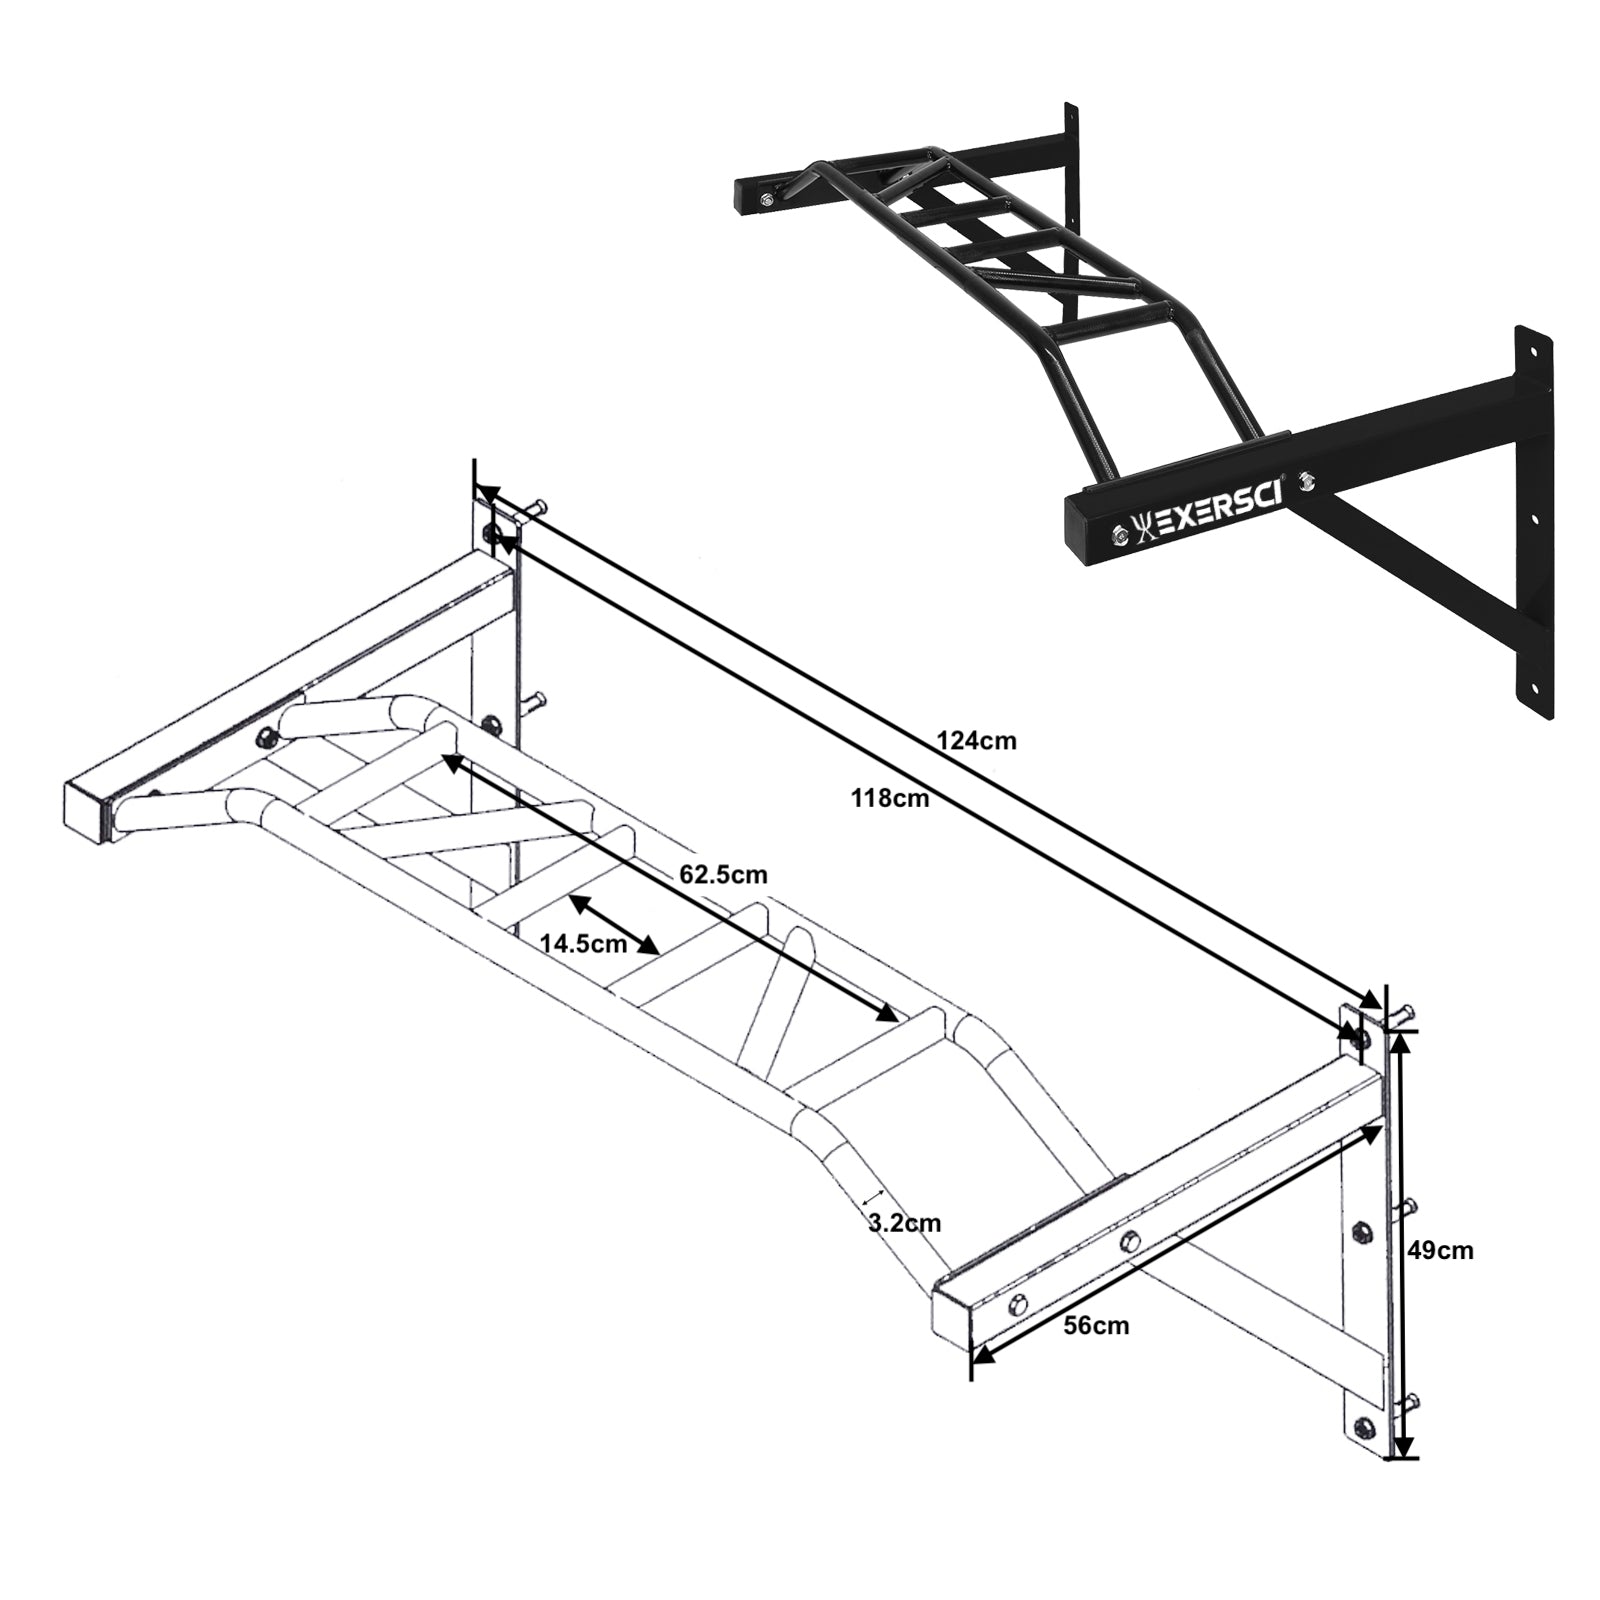 Multi-Grip Wall Mounted Pull Up Bar